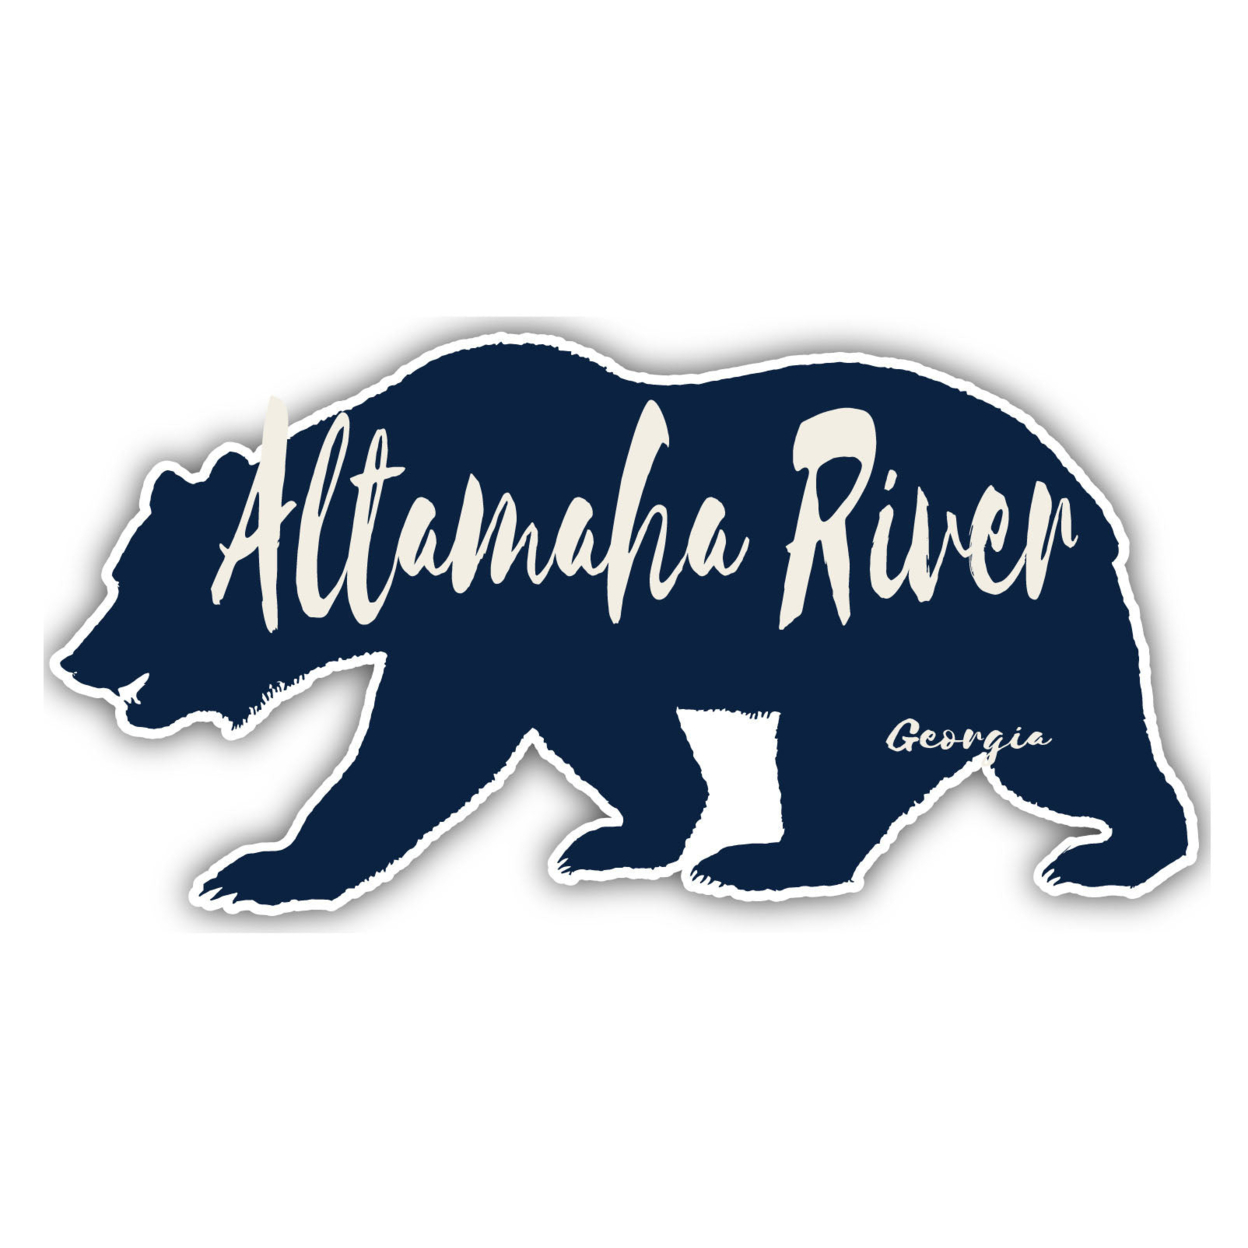 Altamaha River Georgia Souvenir Decorative Stickers (Choose Theme And Size) - 4-Pack, 2-Inch, Great Outdoors